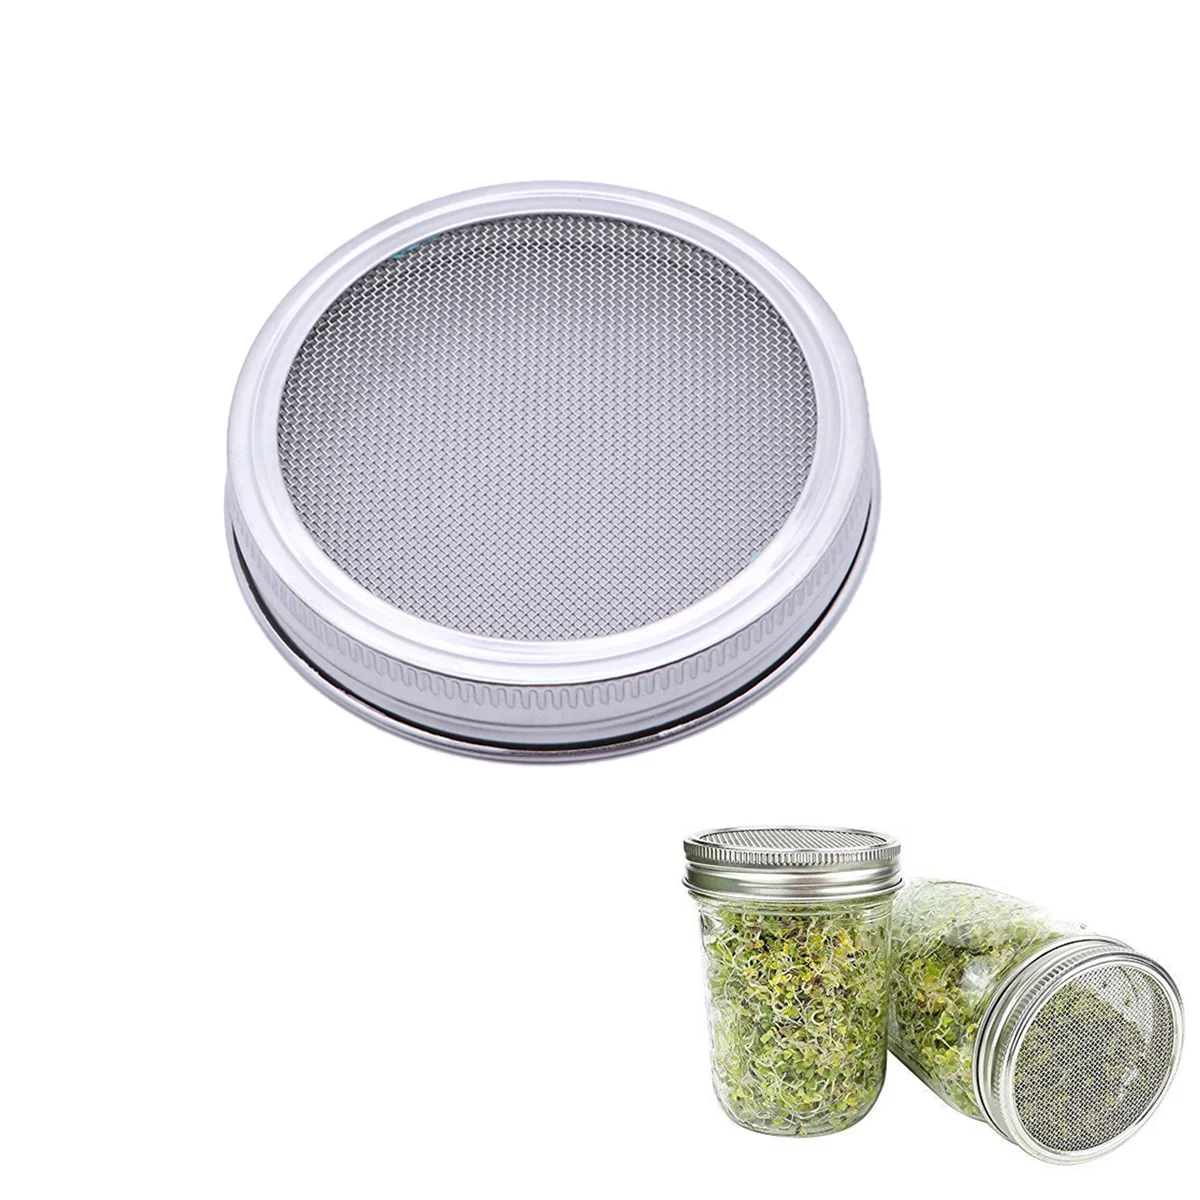 

Sprouting Lid Lids Jar Mason Screen Canning Jars Mesh Mouth Strainer Sprouts Germination Sprouter Bean Wide Steel Regular